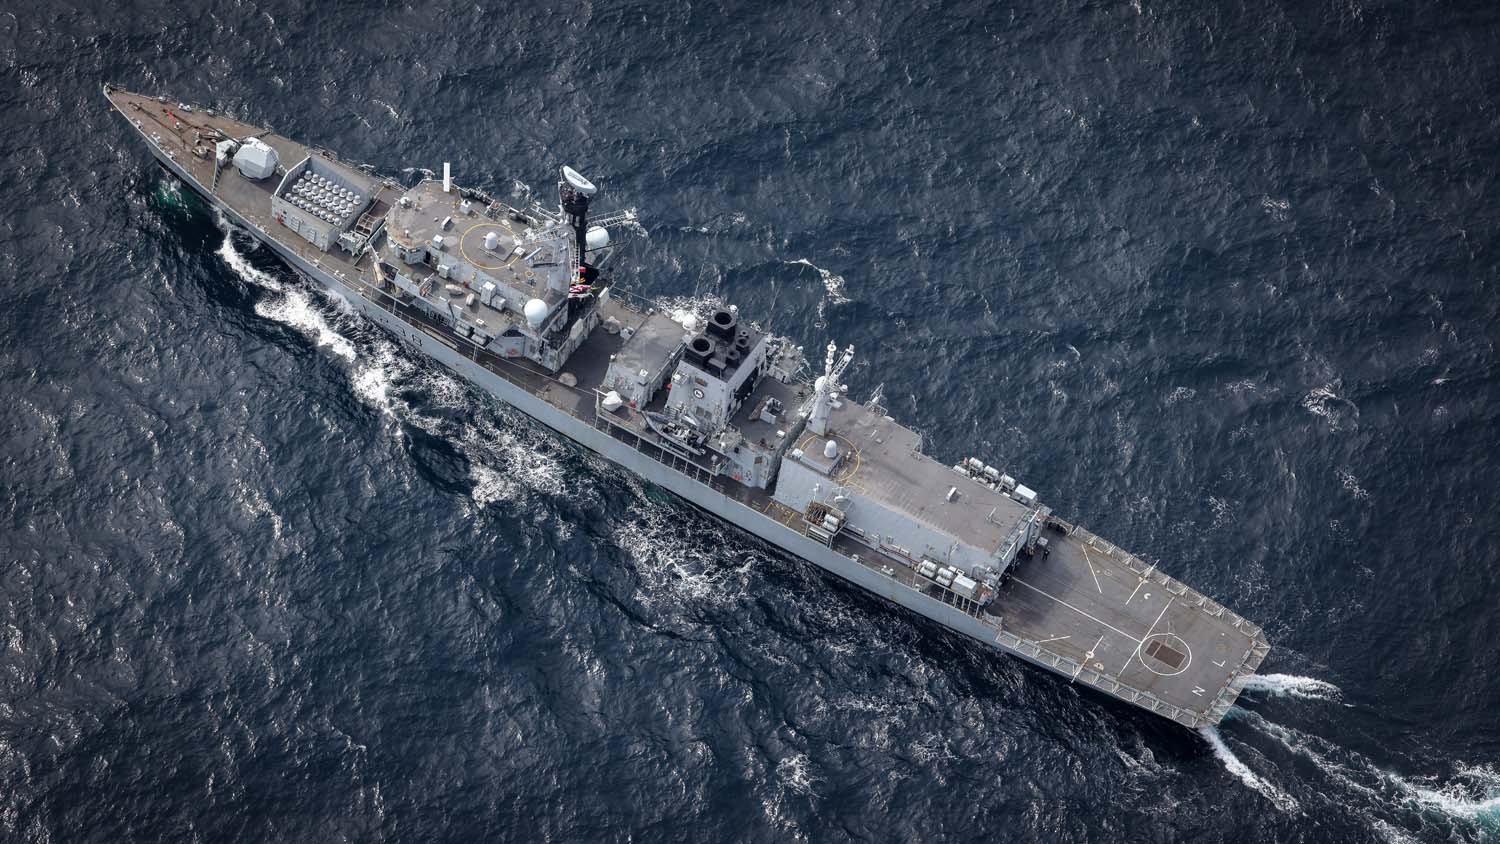 Pictured: HMS Northumberland at sea on operations. HMS Northumberland is a Royal Navy Type 23 frigate, based in Plymouth. She specialises in hunting submarines and currently has a Royal Navy Merlin embarked for her current taskings.